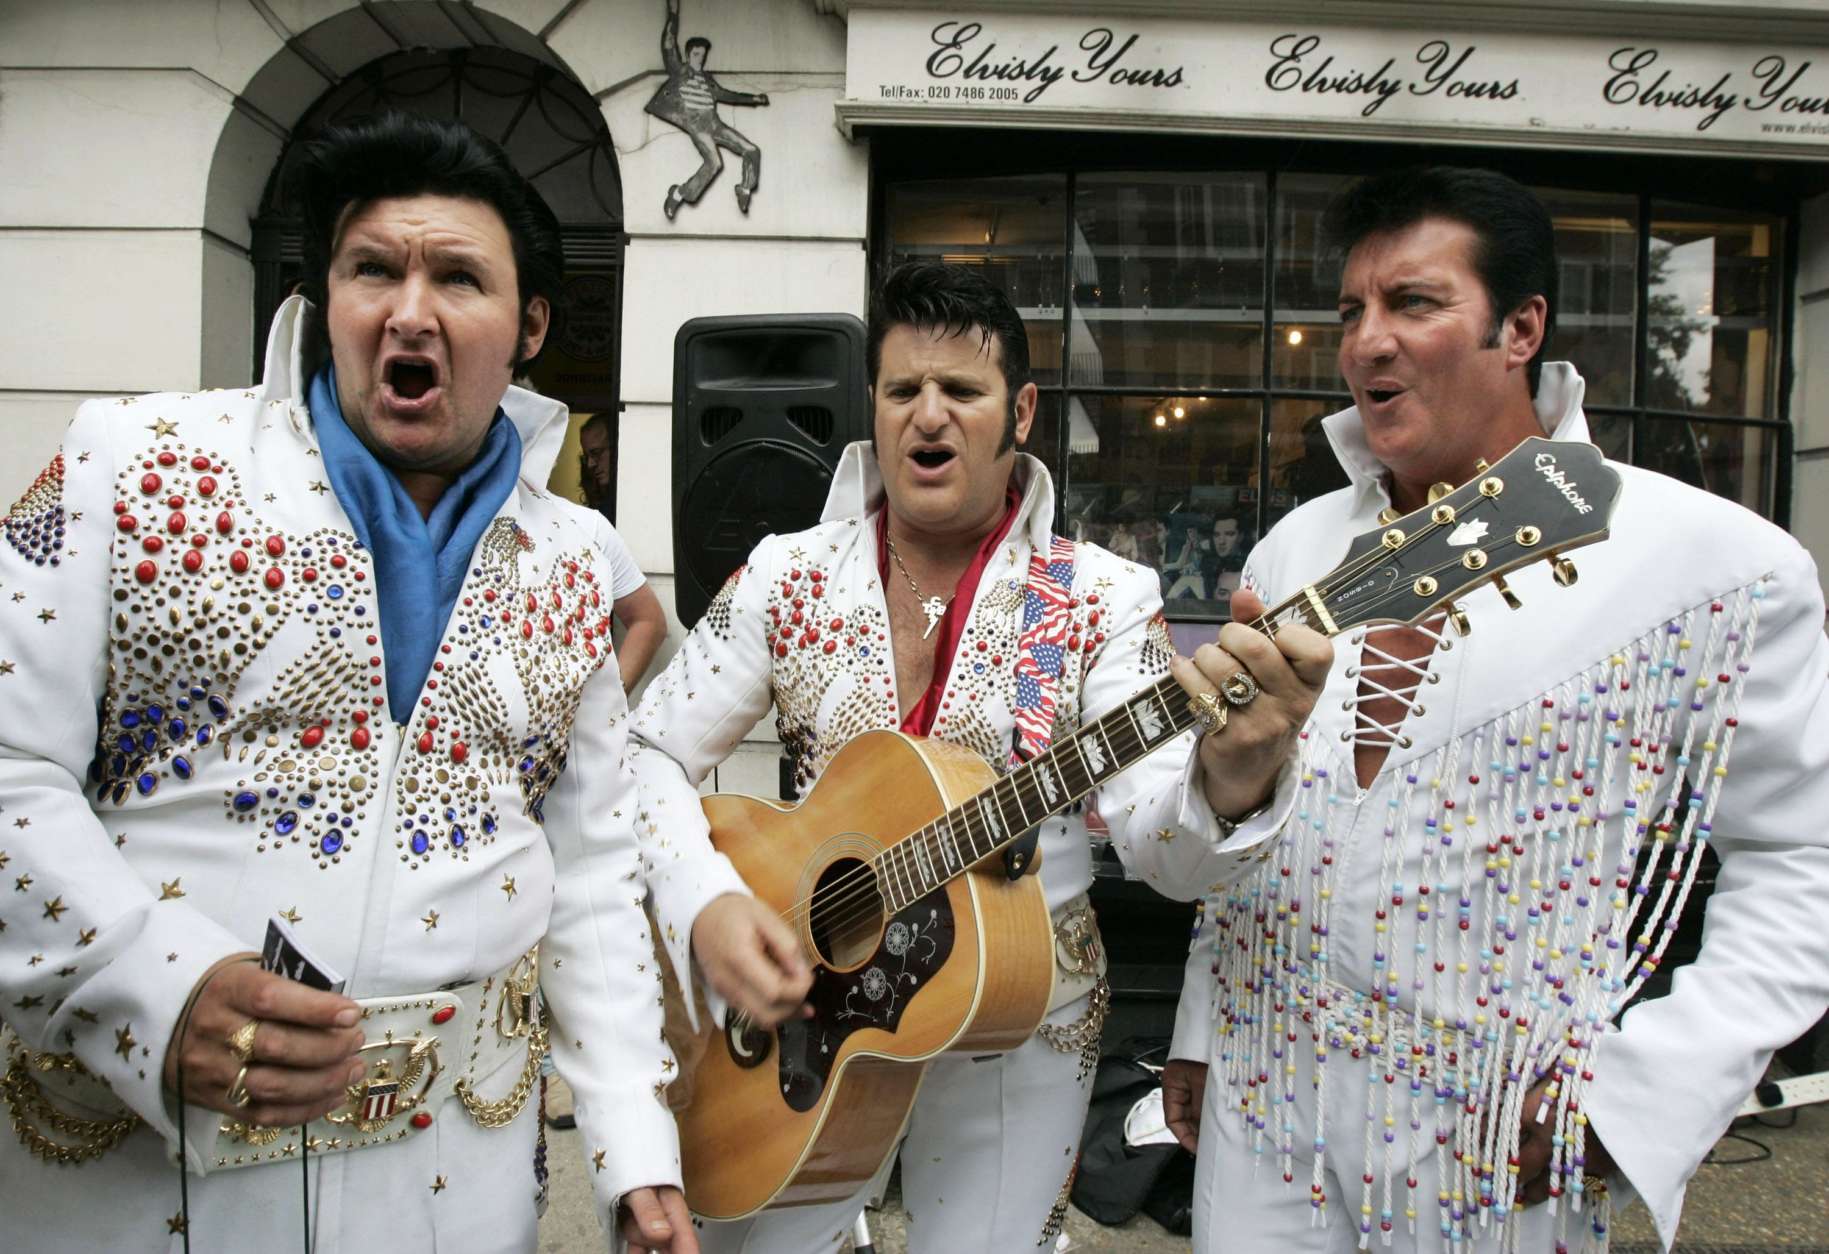 British Elvis Presley impersonators, from left to right, Ian Coulson, Elvis Shmelvis and Gary King, perform during an event outside a rock memorabilia shop in central London to mark the anniversary of the singer's death, Thursday Aug. 16, 2007. The event to mark 30 years since the death of Elvis also raised money for a local charity. (AP Photo/Lefteris Pitarakis)